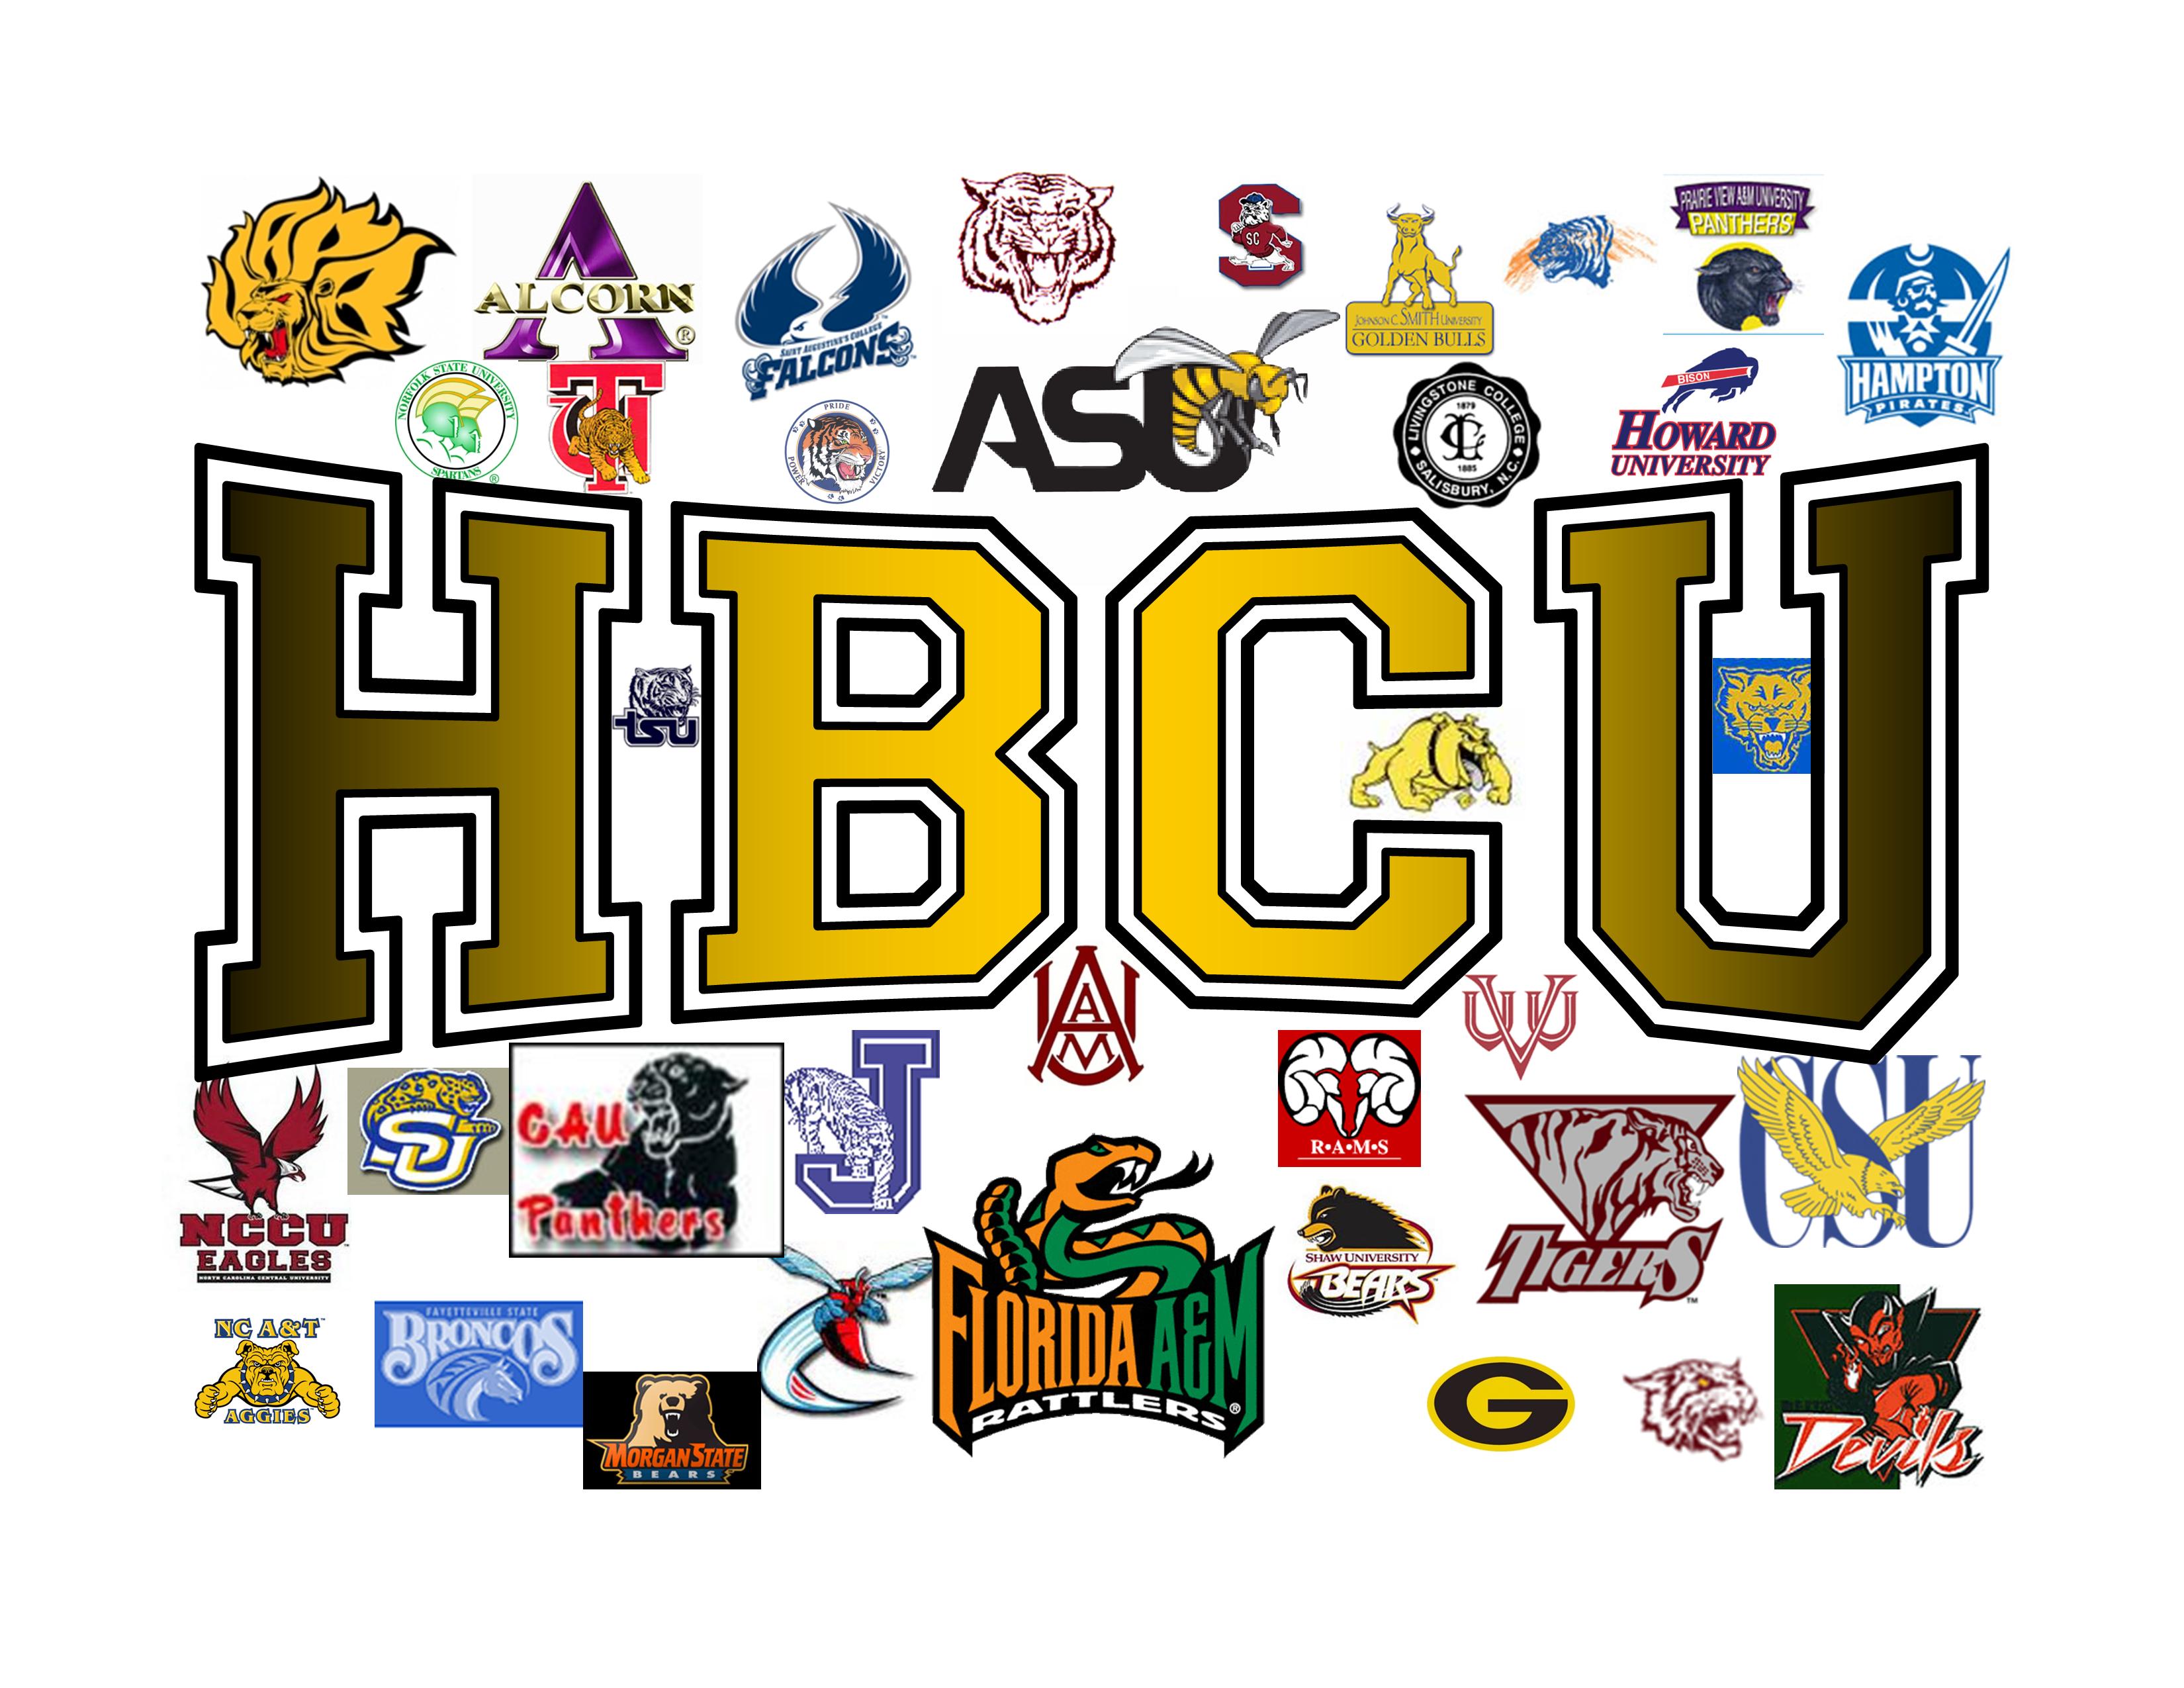 Historically Black Colleges & Universities: What Makes Them So